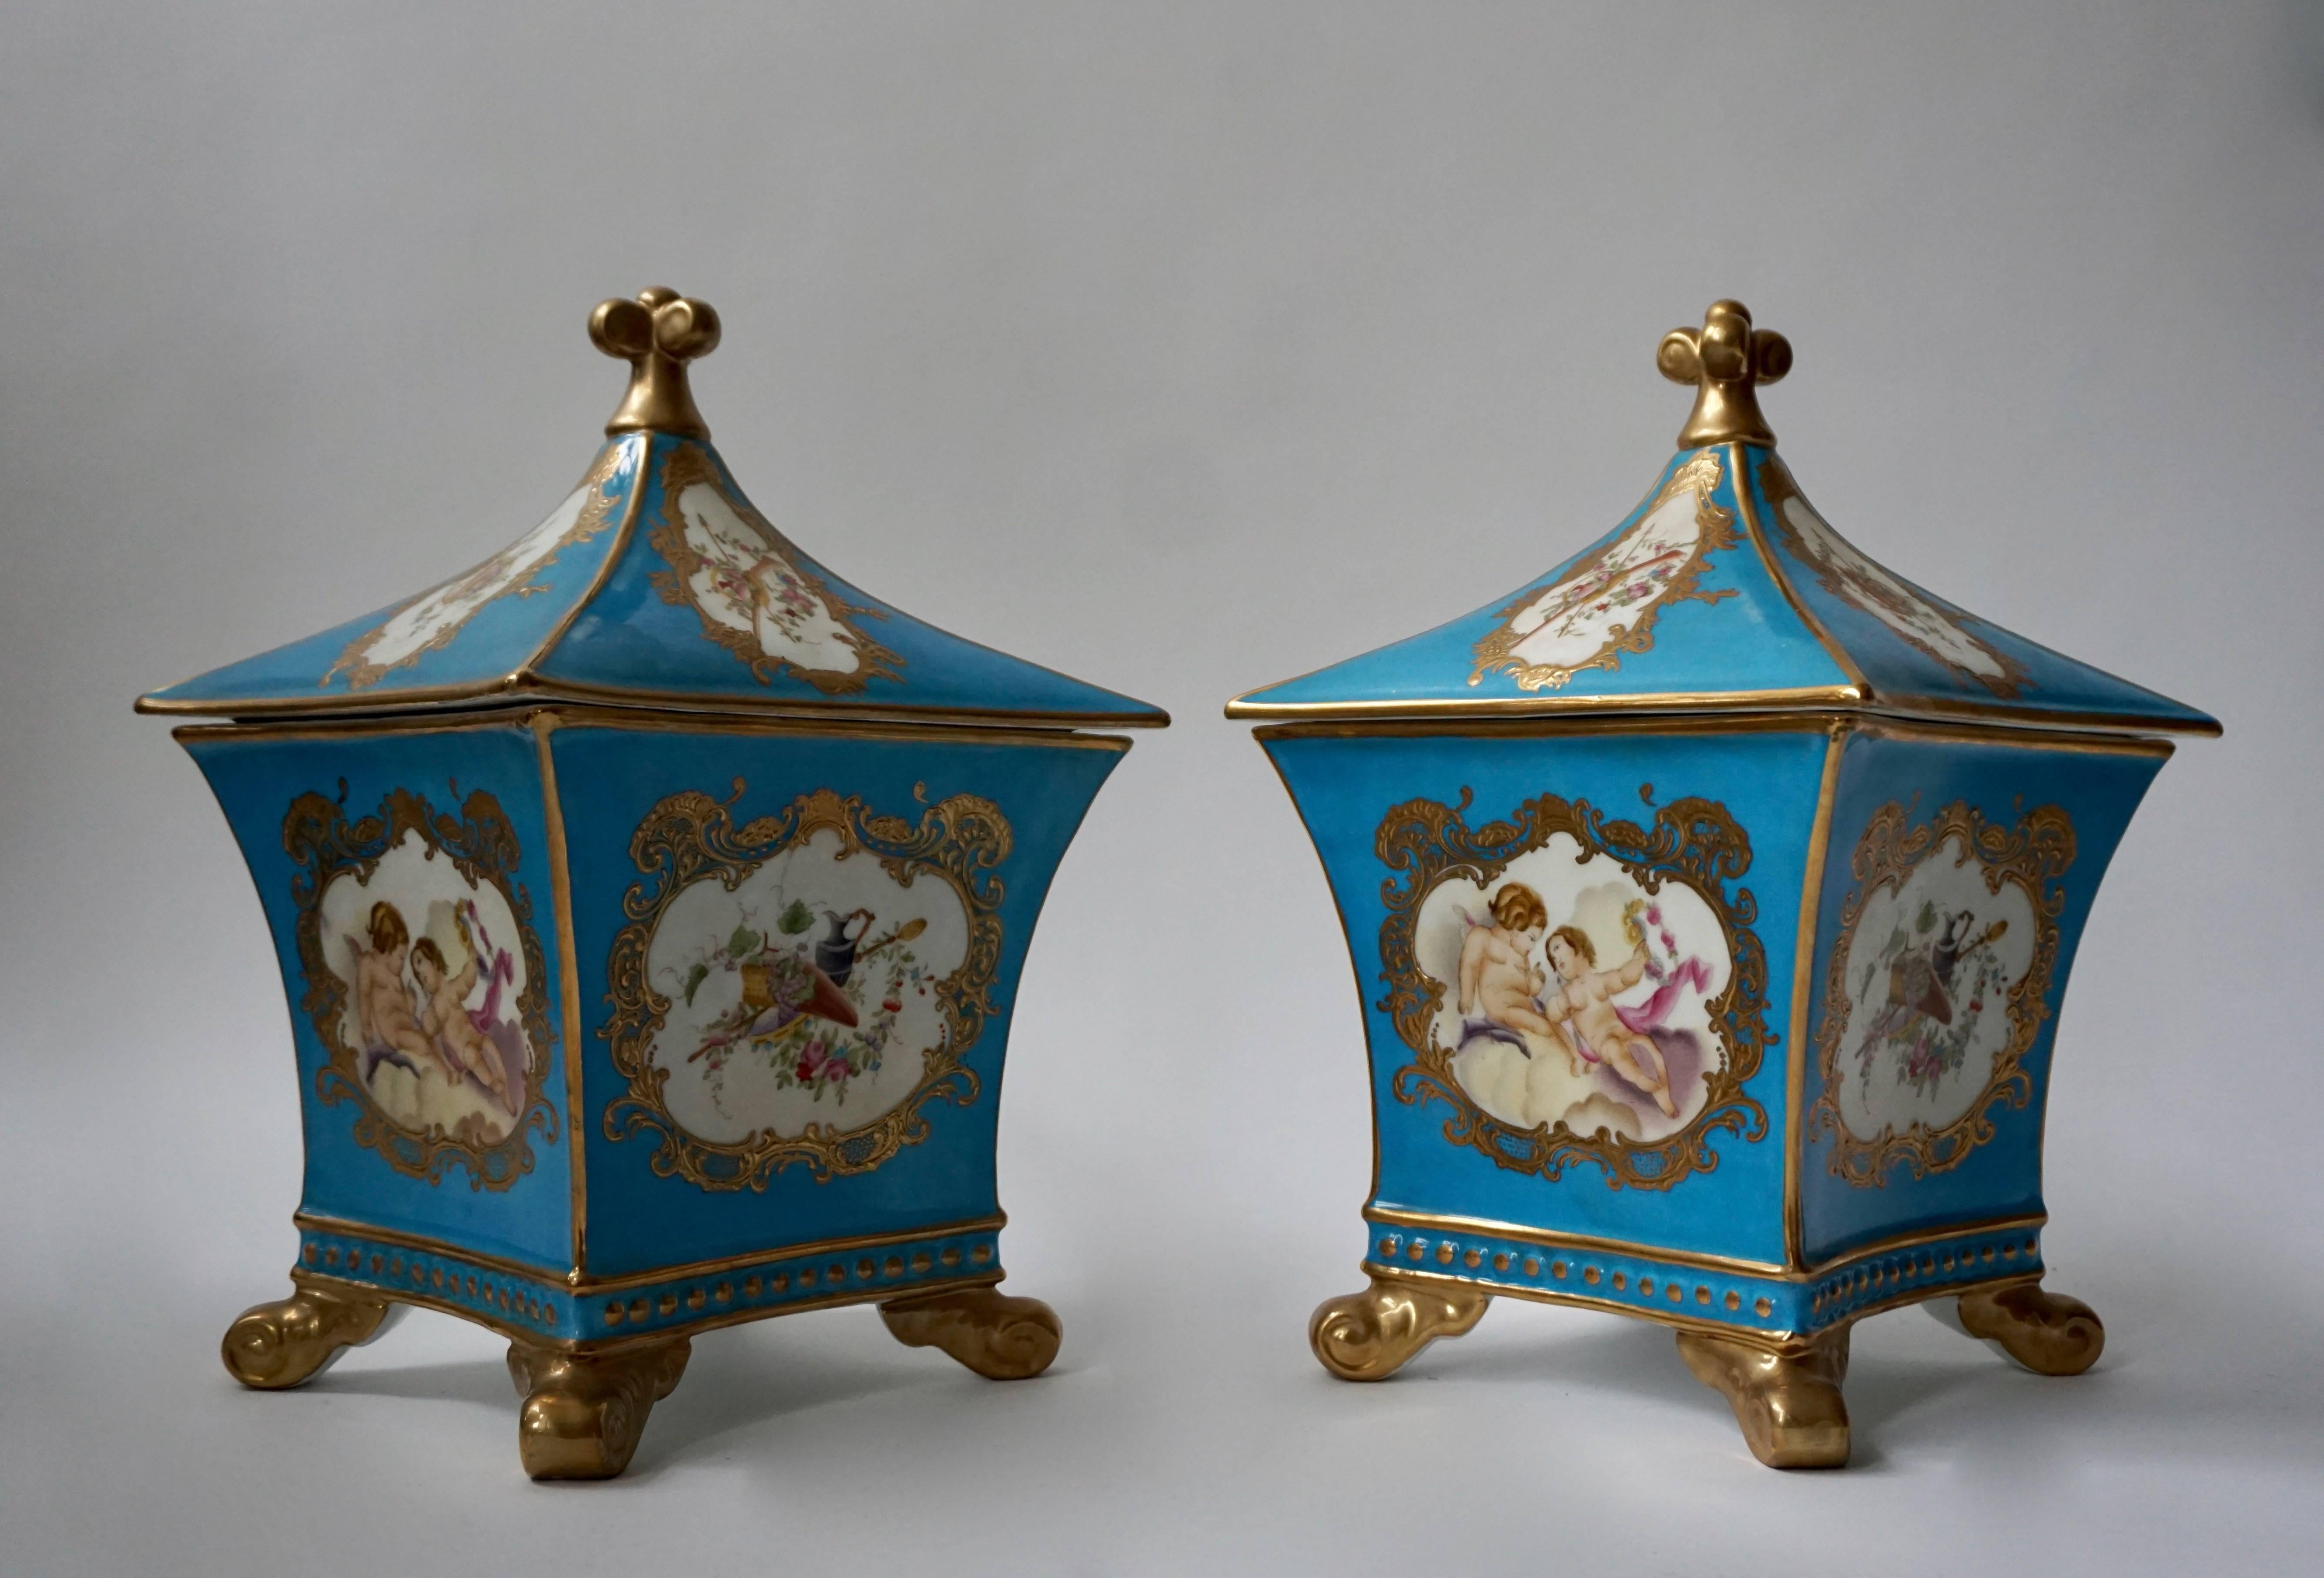 A pair of porcelain urns. Mark on the bottom.
More photos available upon request.
Measure: Height 32 cm.
Width 22 cm.